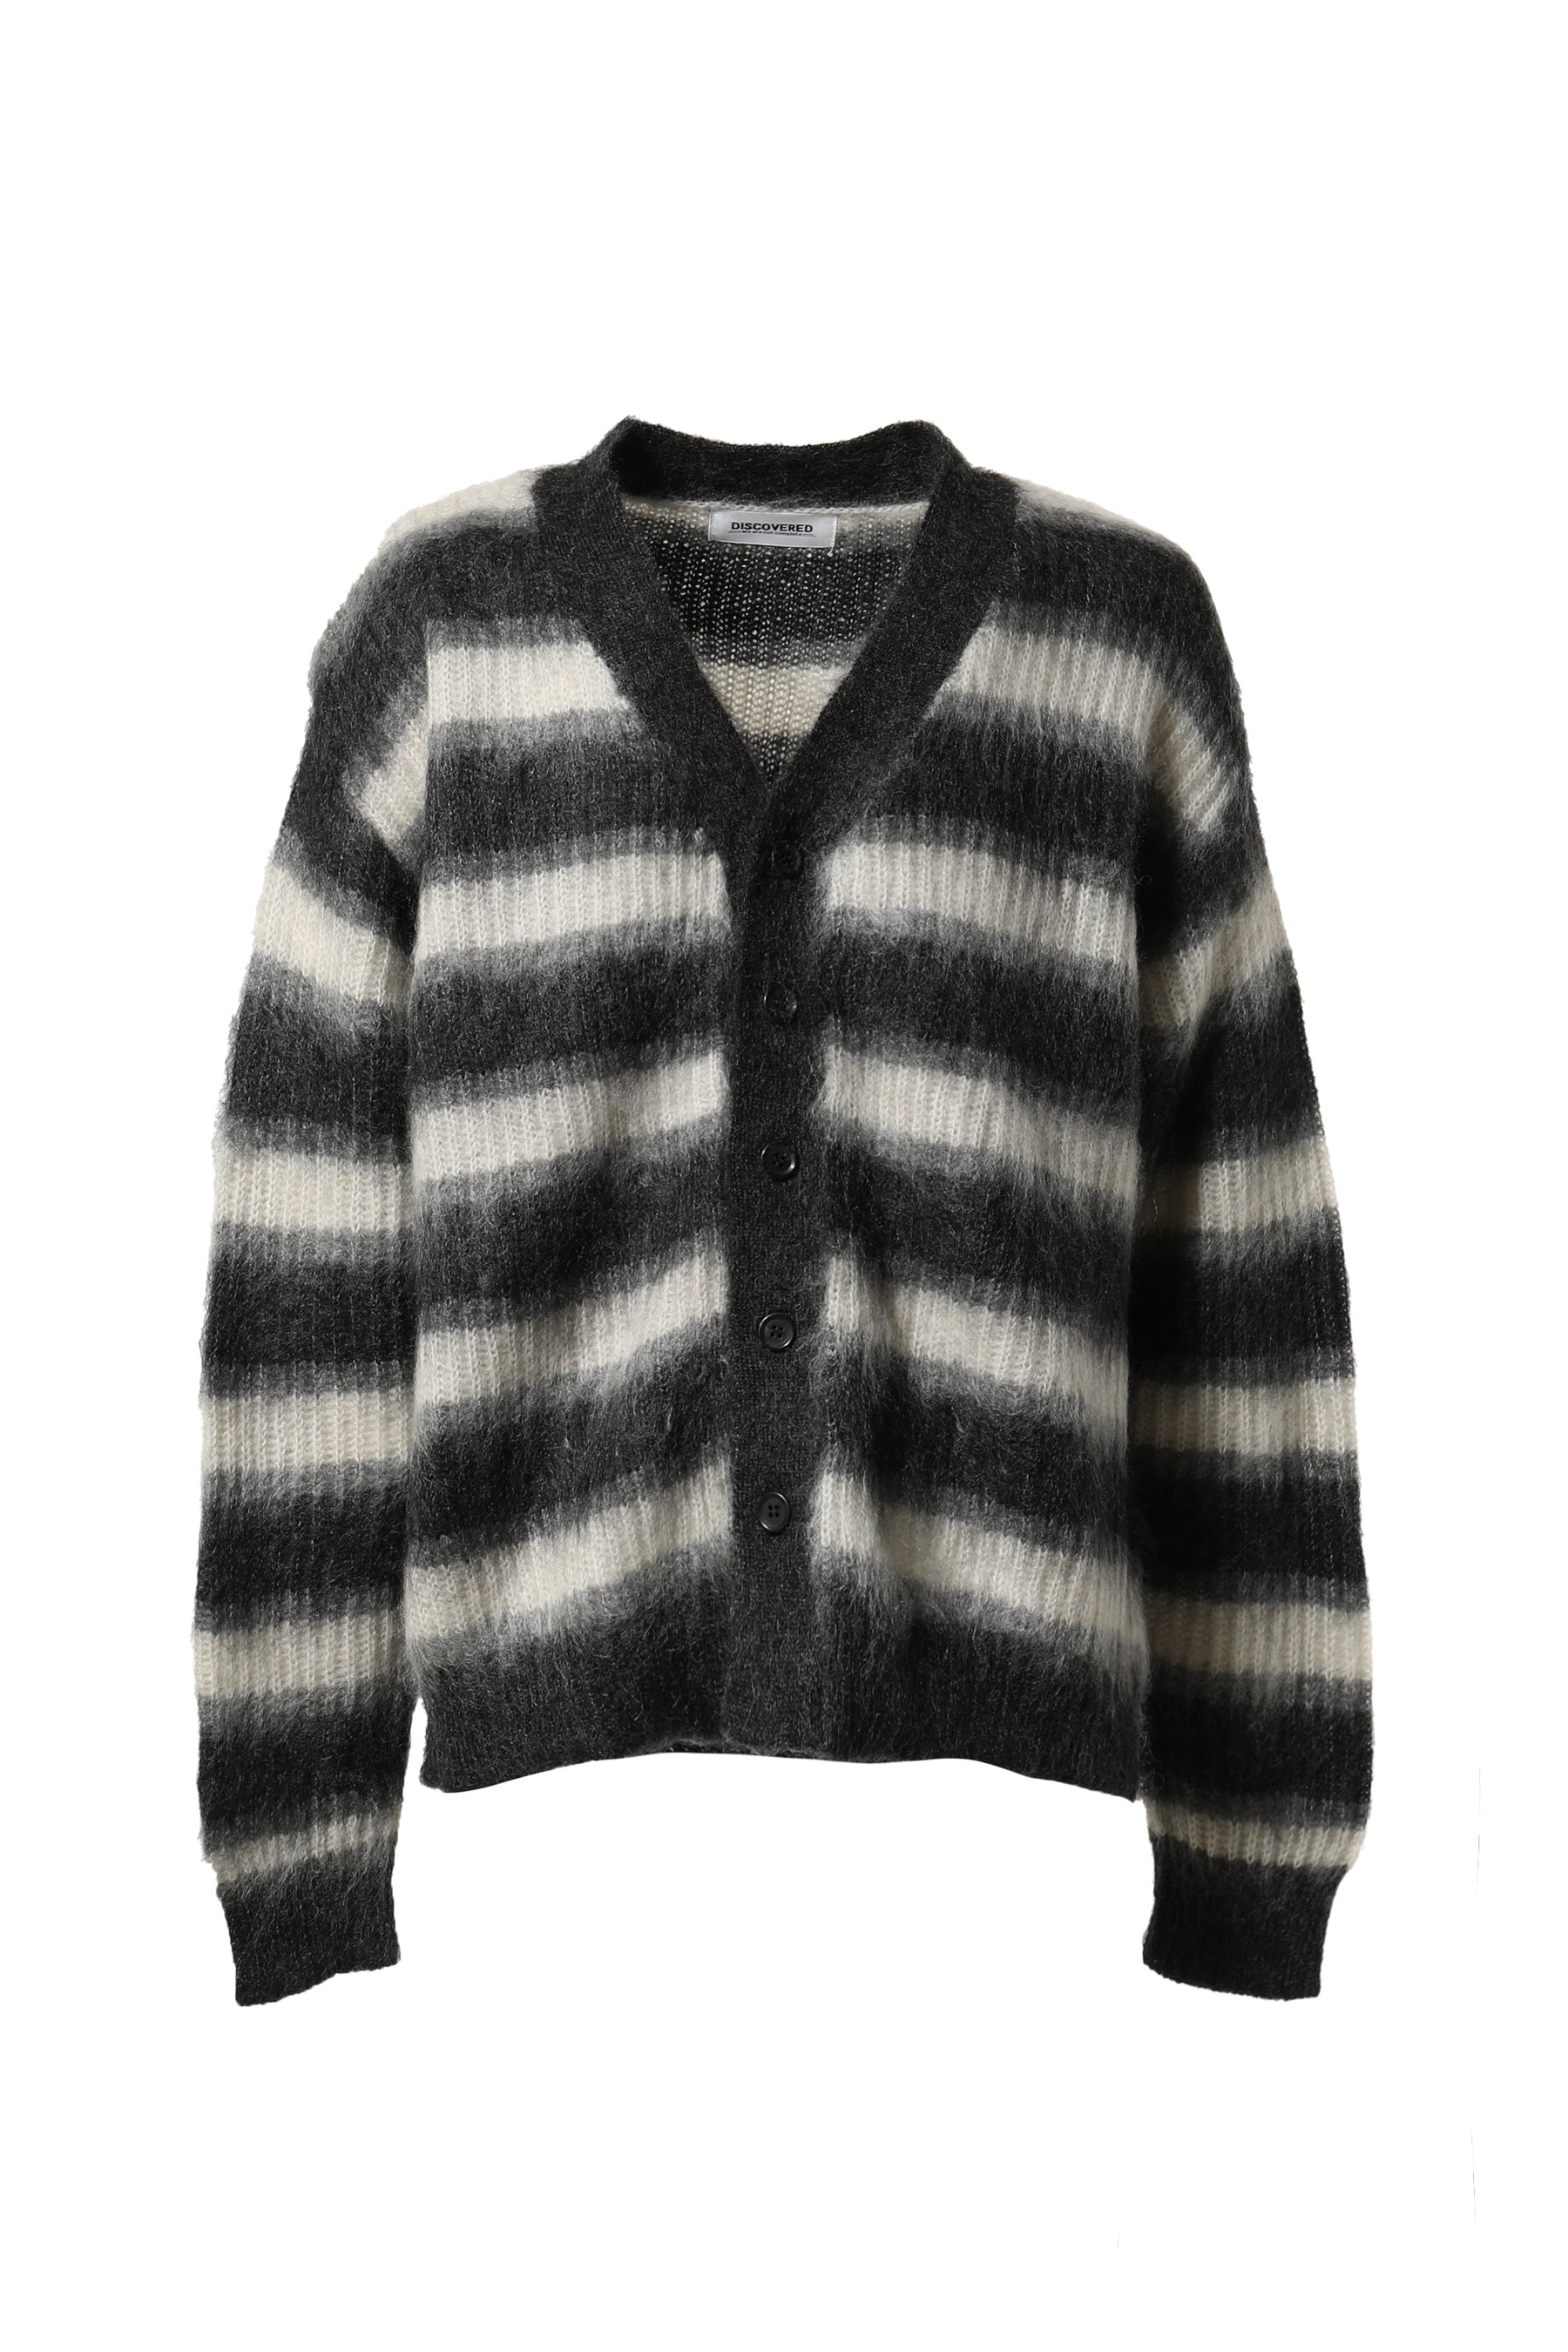 DISCOVERED FW22 MOHAIR BORDER KNIT CARDIGAN (EXCLUSIVE) / BLK - NUBIAN